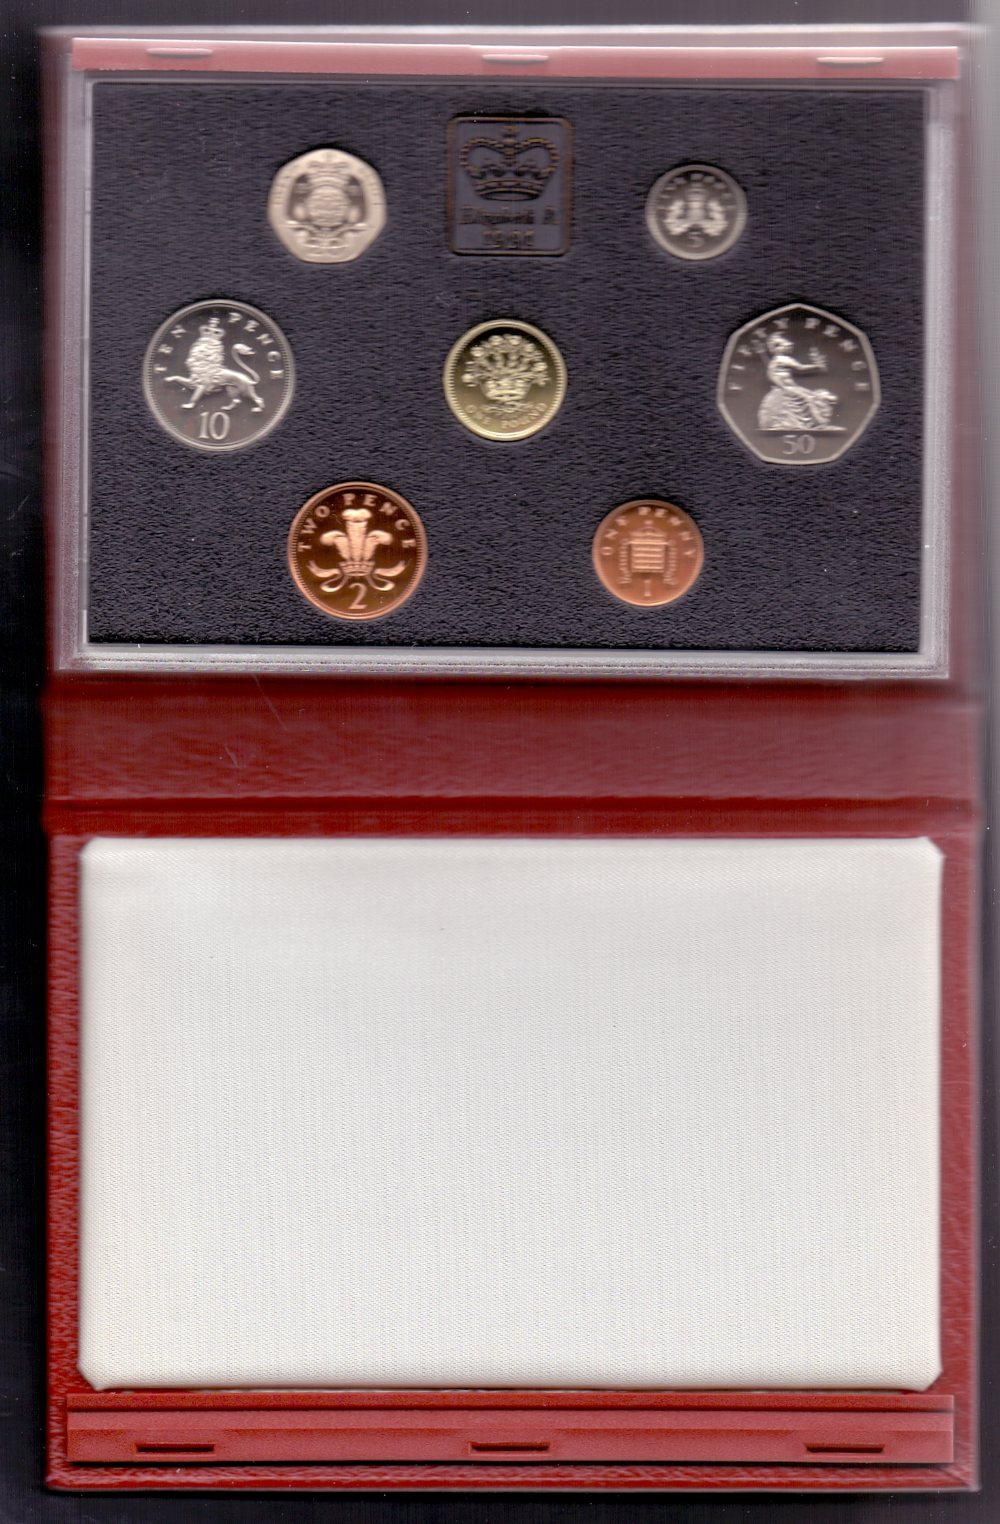 1991 Royal Mint proof set of coinage